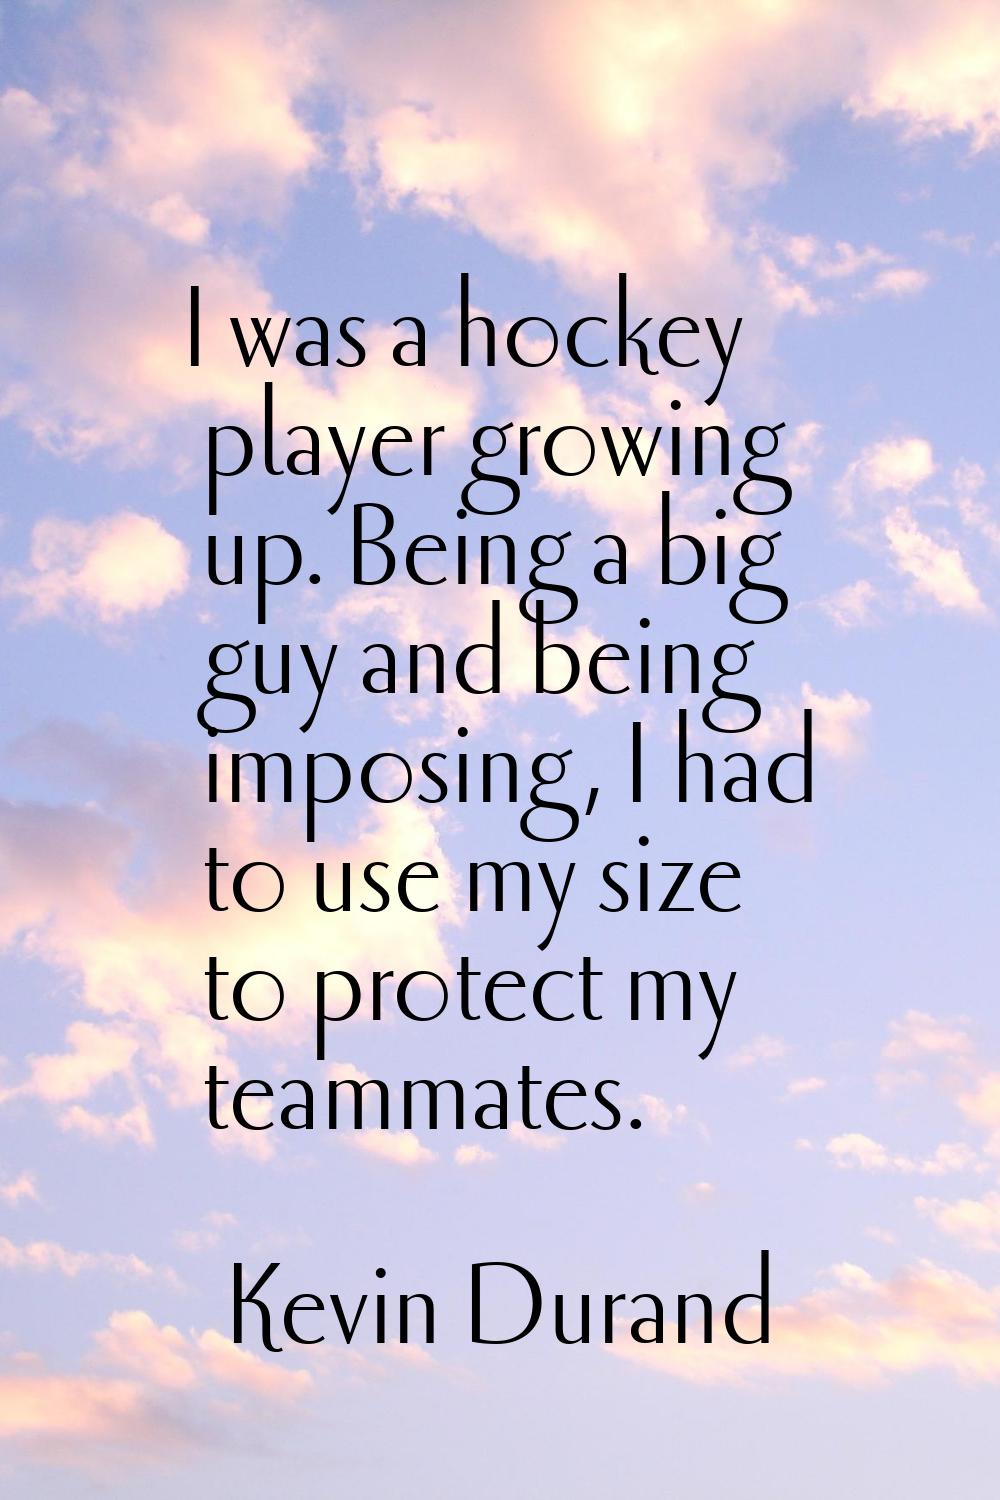 I was a hockey player growing up. Being a big guy and being imposing, I had to use my size to prote